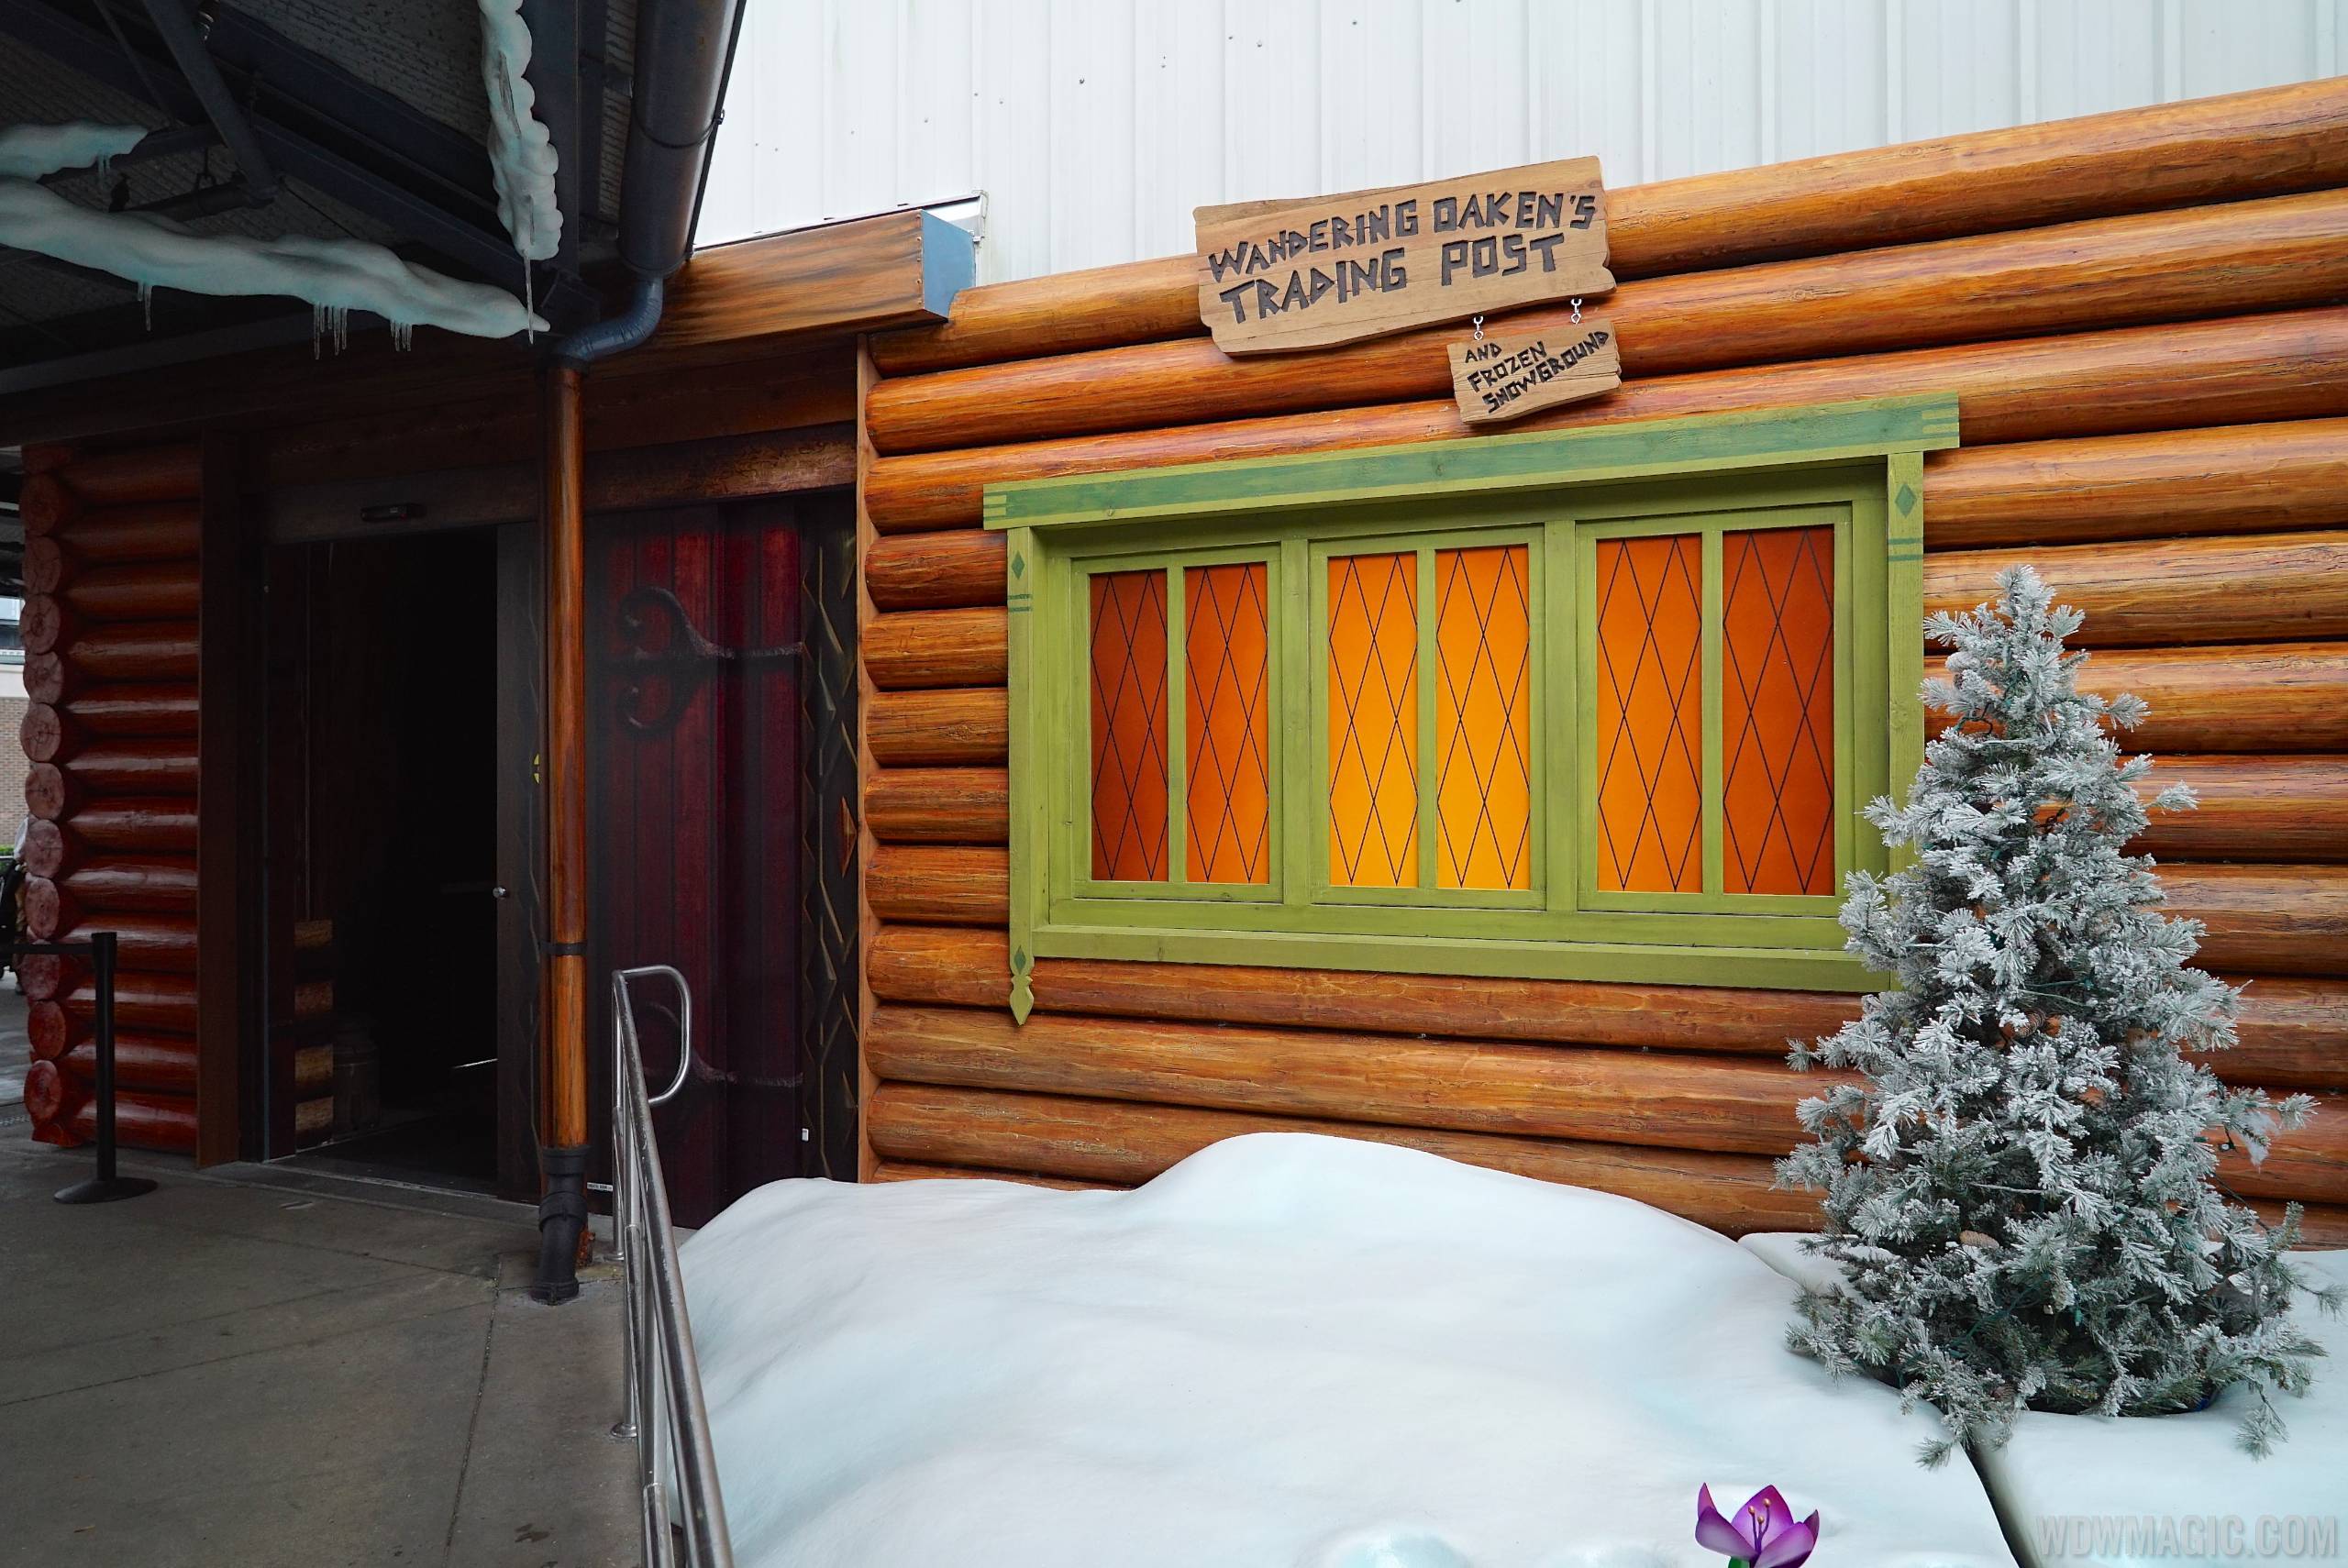 Wandering Oakens Trading Post and Frozen Snowground opening day